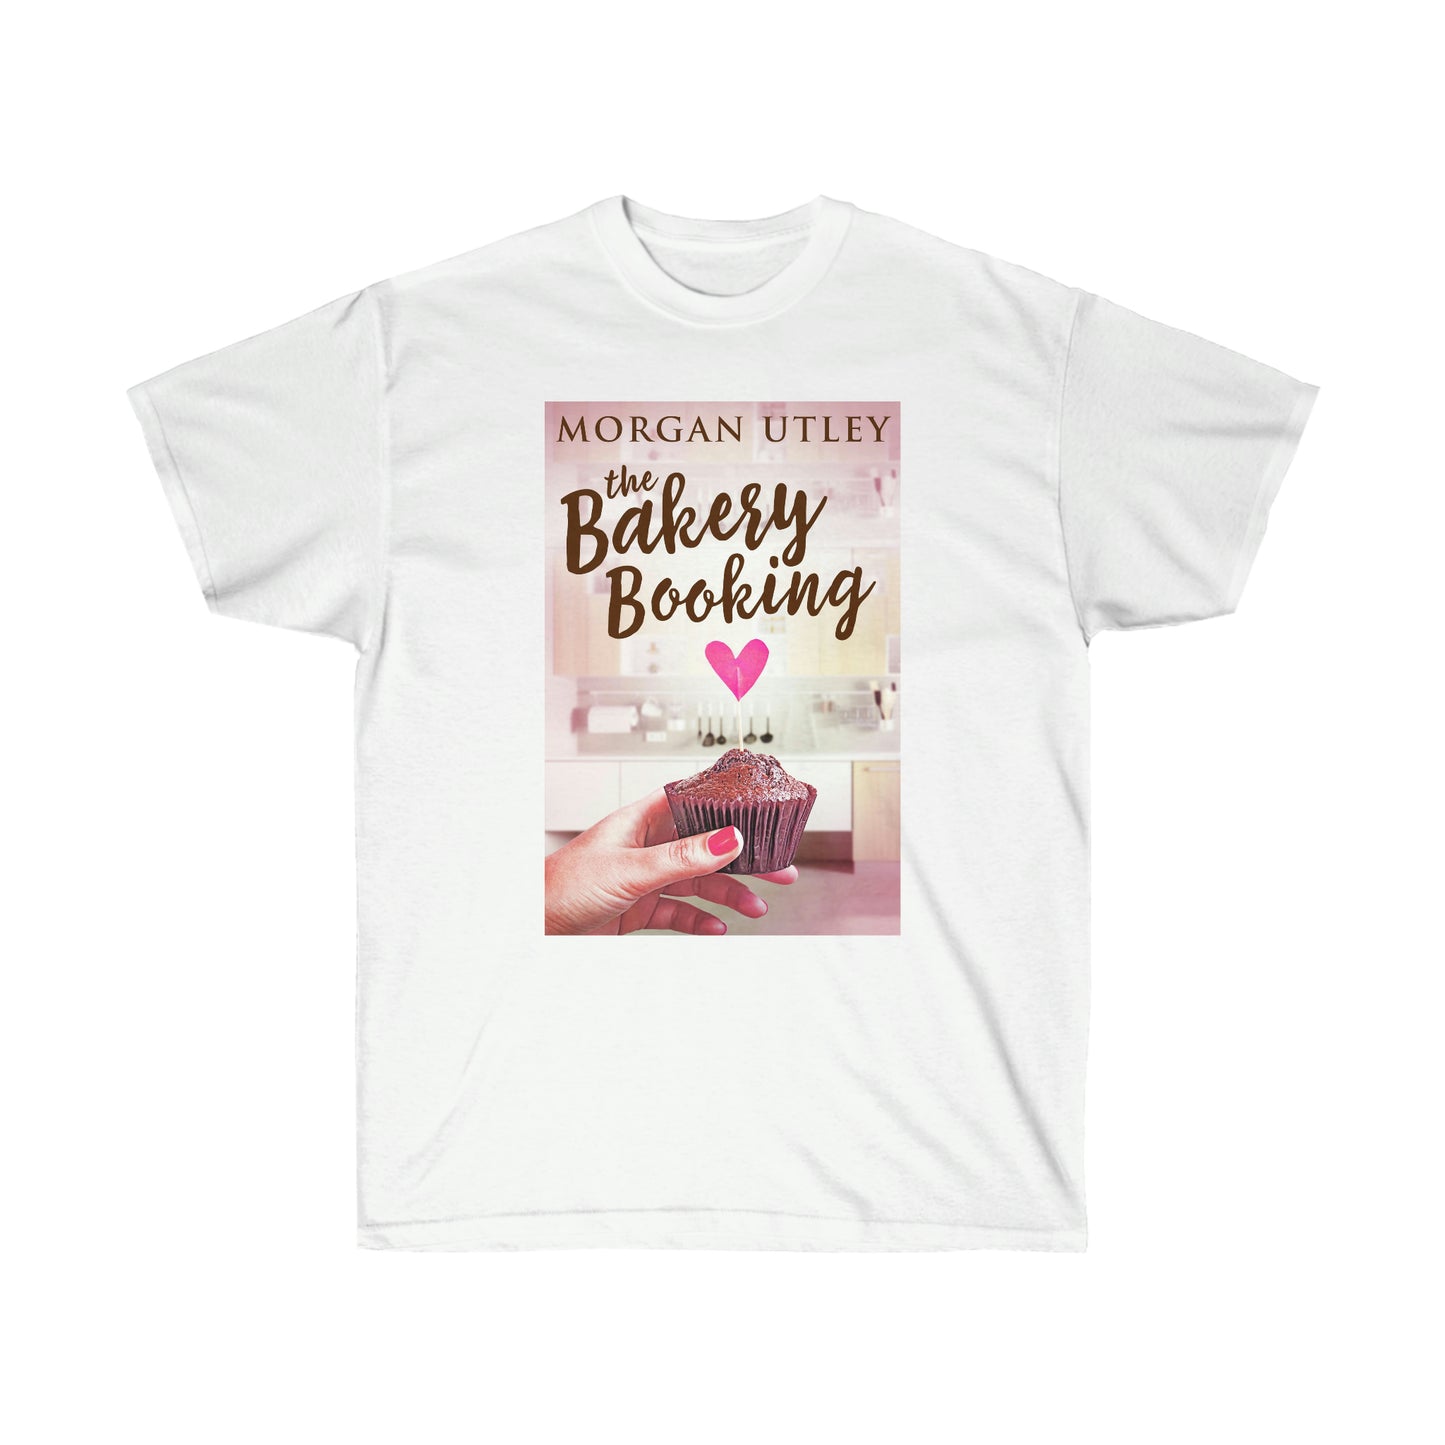 The Bakery Booking - Unisex T-Shirt